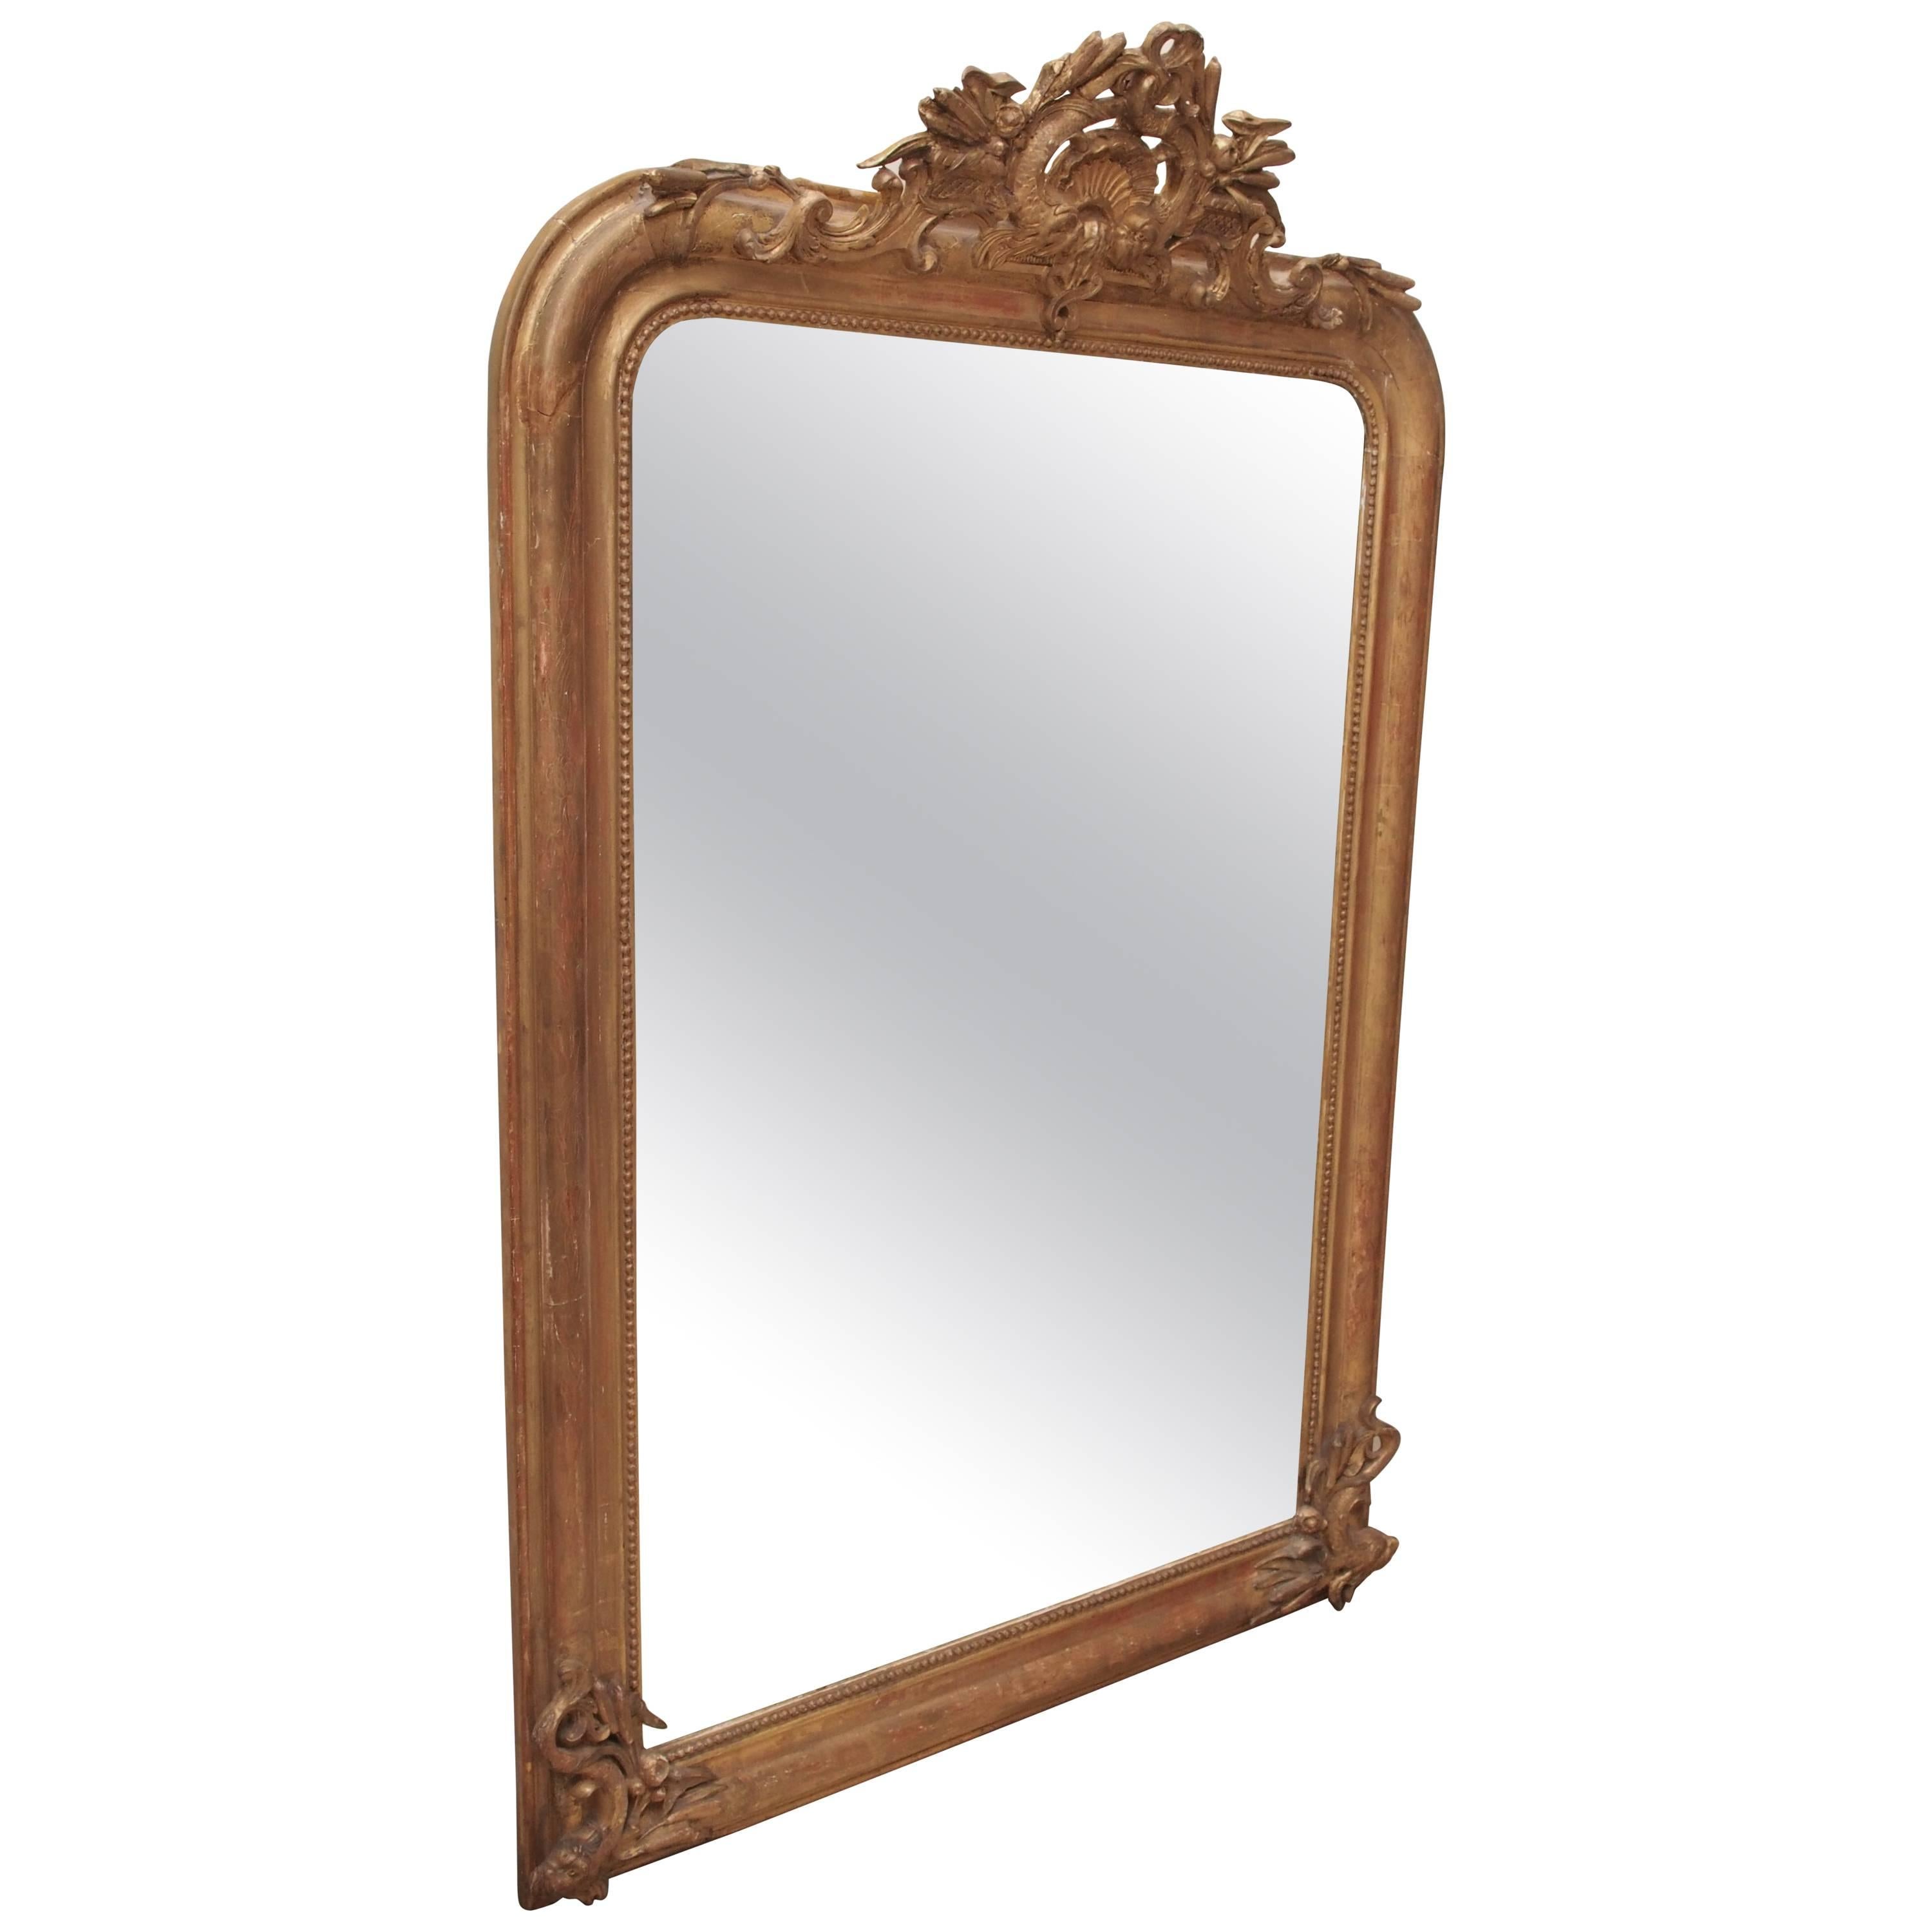 19th Century French Louis XVI Carved Gilt Wood Frame with Mirror